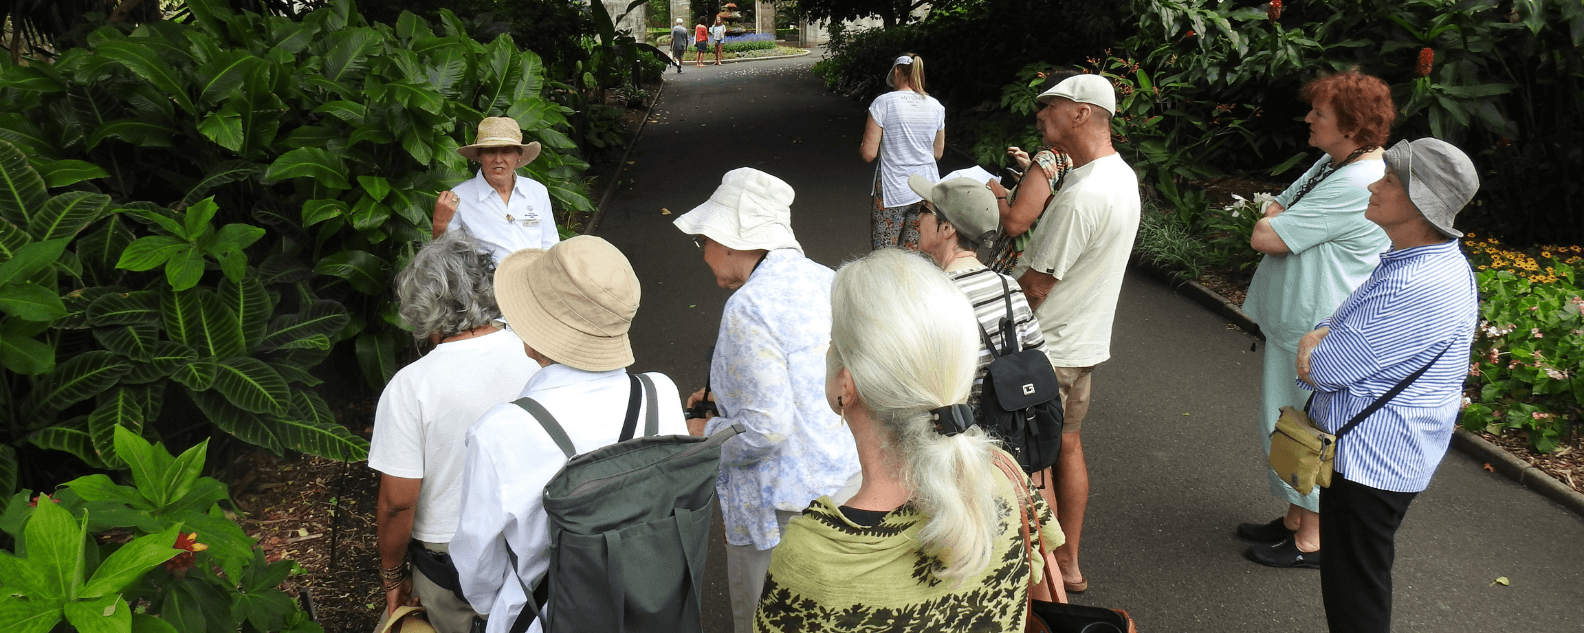 people on guided walk in RBG